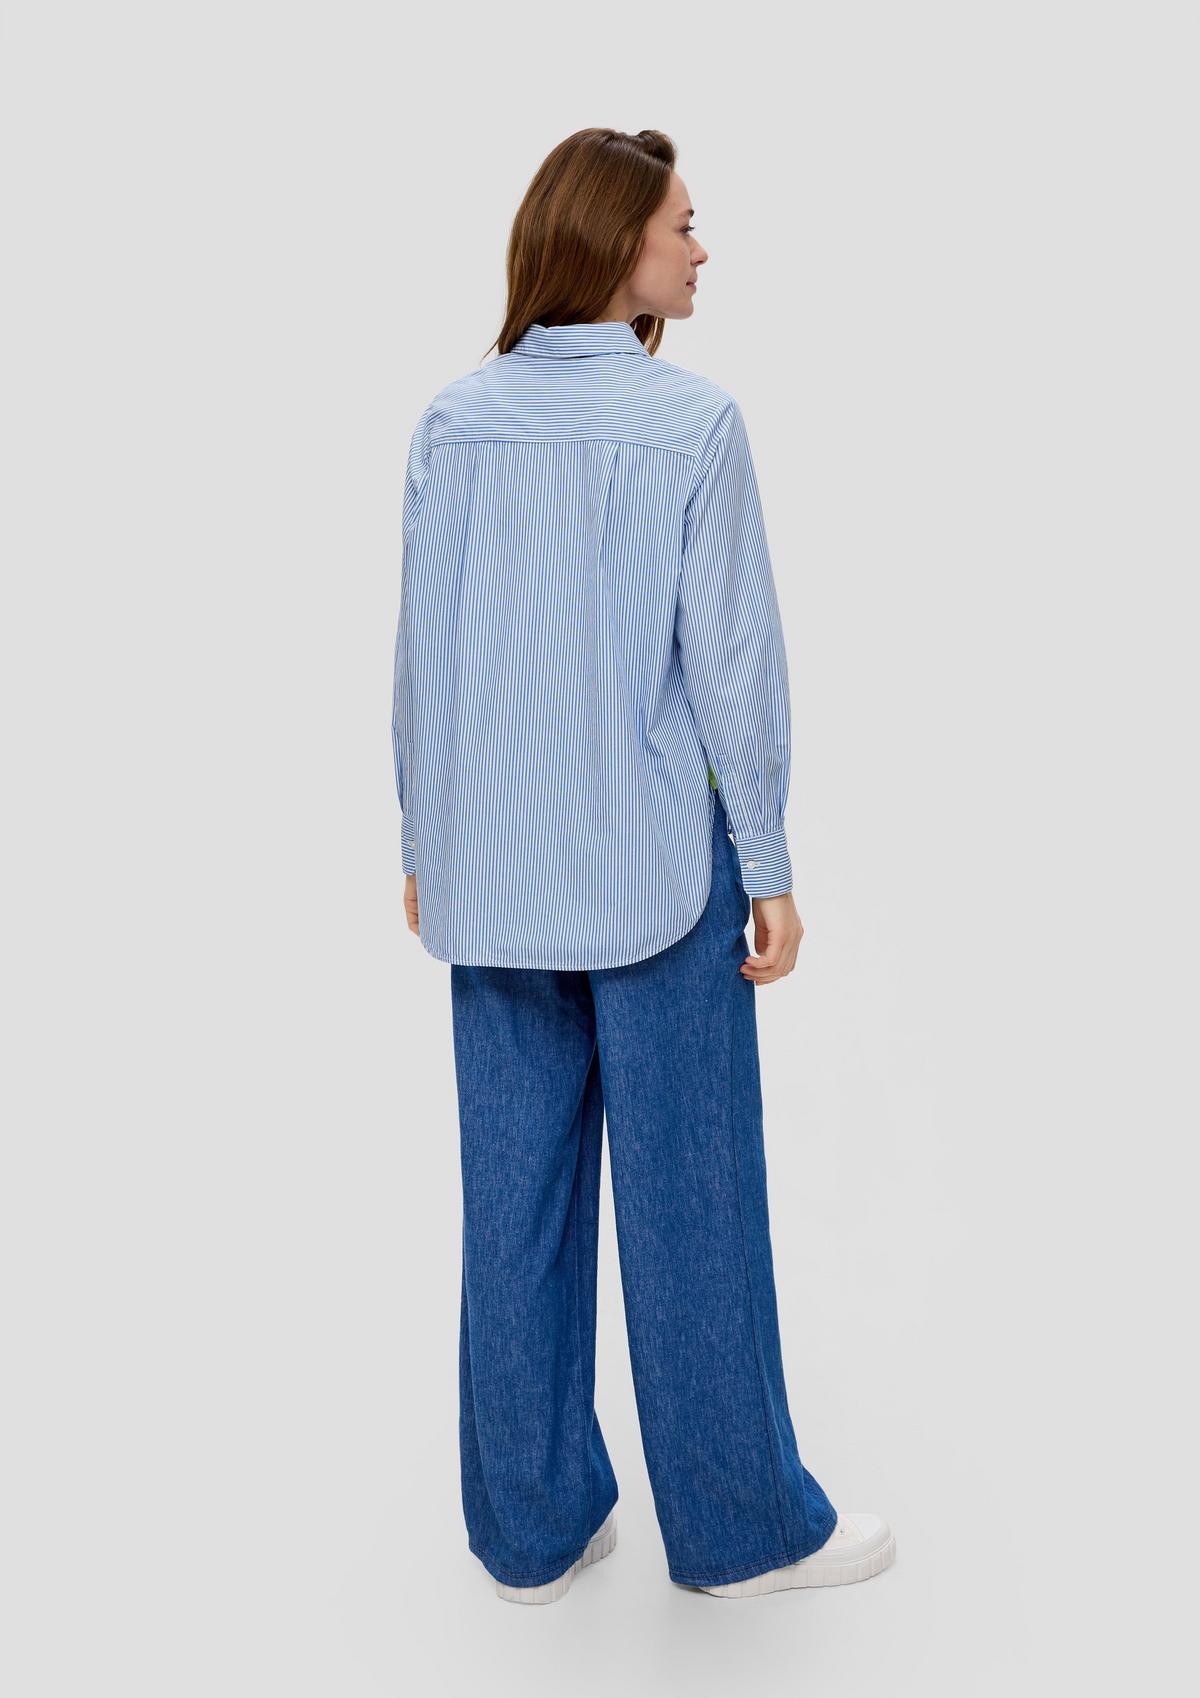 Blouse with an elongated back - royal blue | s.Oliver